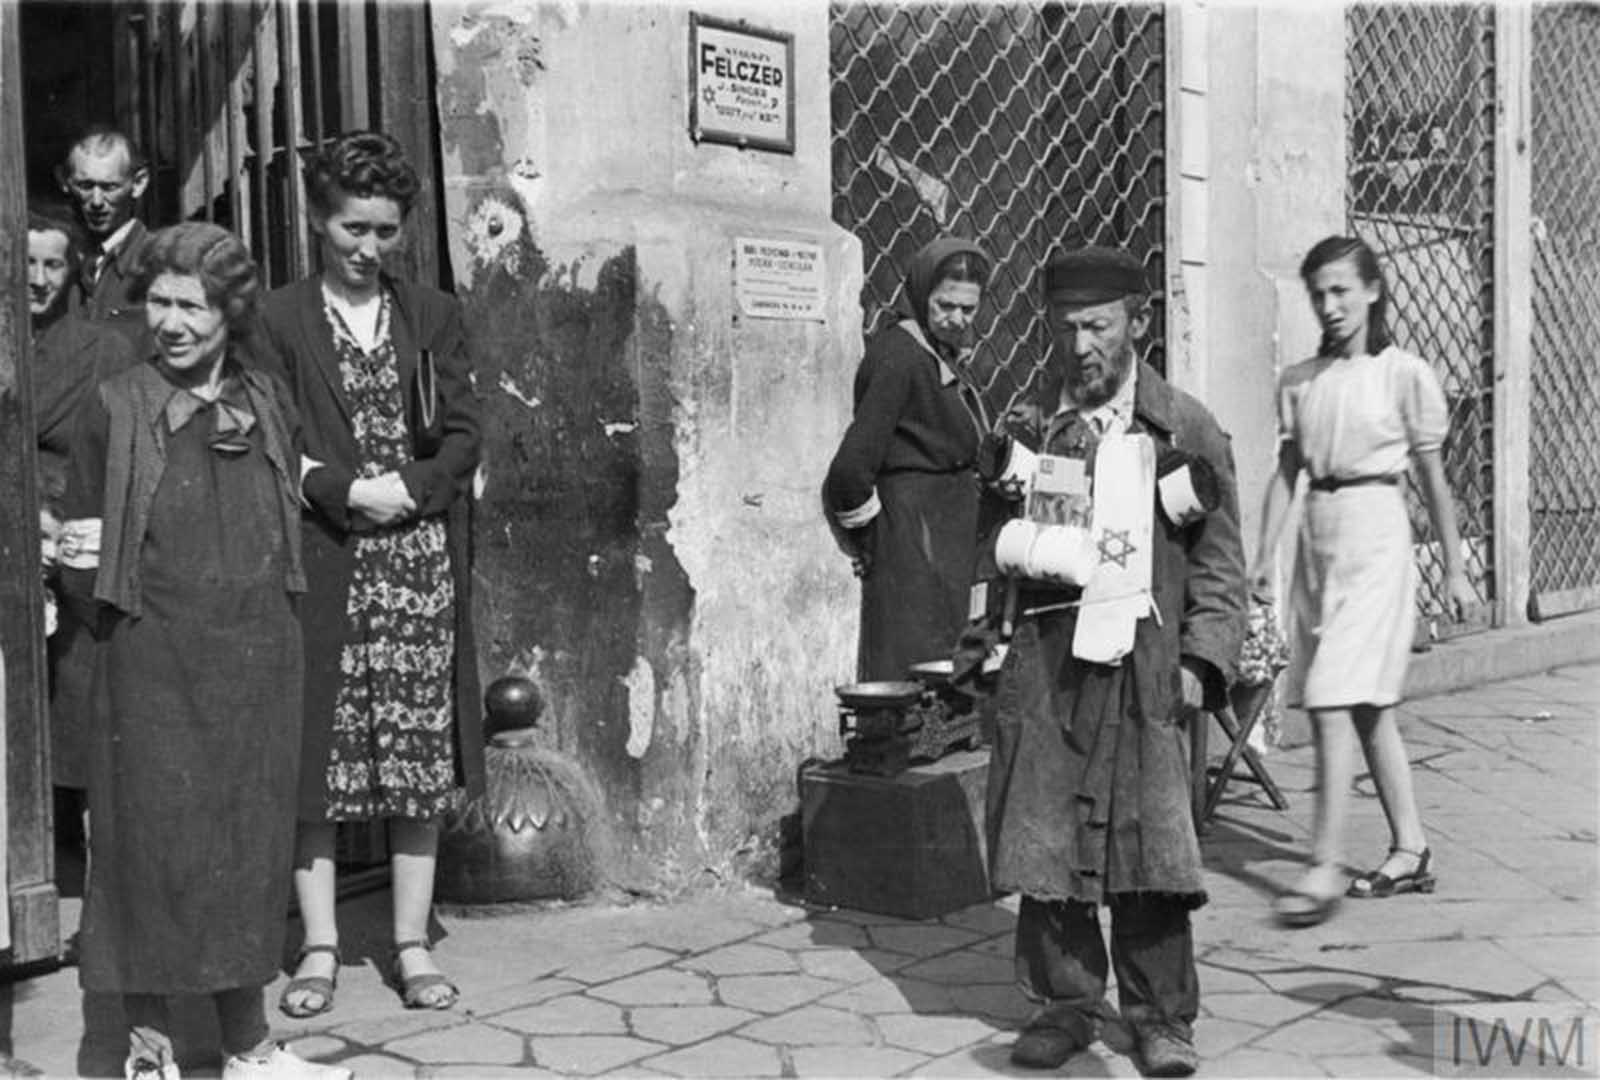 A street armband seller and a group of pedestrians on 18 Zamenhofa Street (probably) in the ghetto, summer 1941. Note two advertising plaques on the wall in the background - for Senior Medic (starszy felczer) named J. Singer and for typewriting services (address given - 18 Zamenhofa Street, flat no. 38).